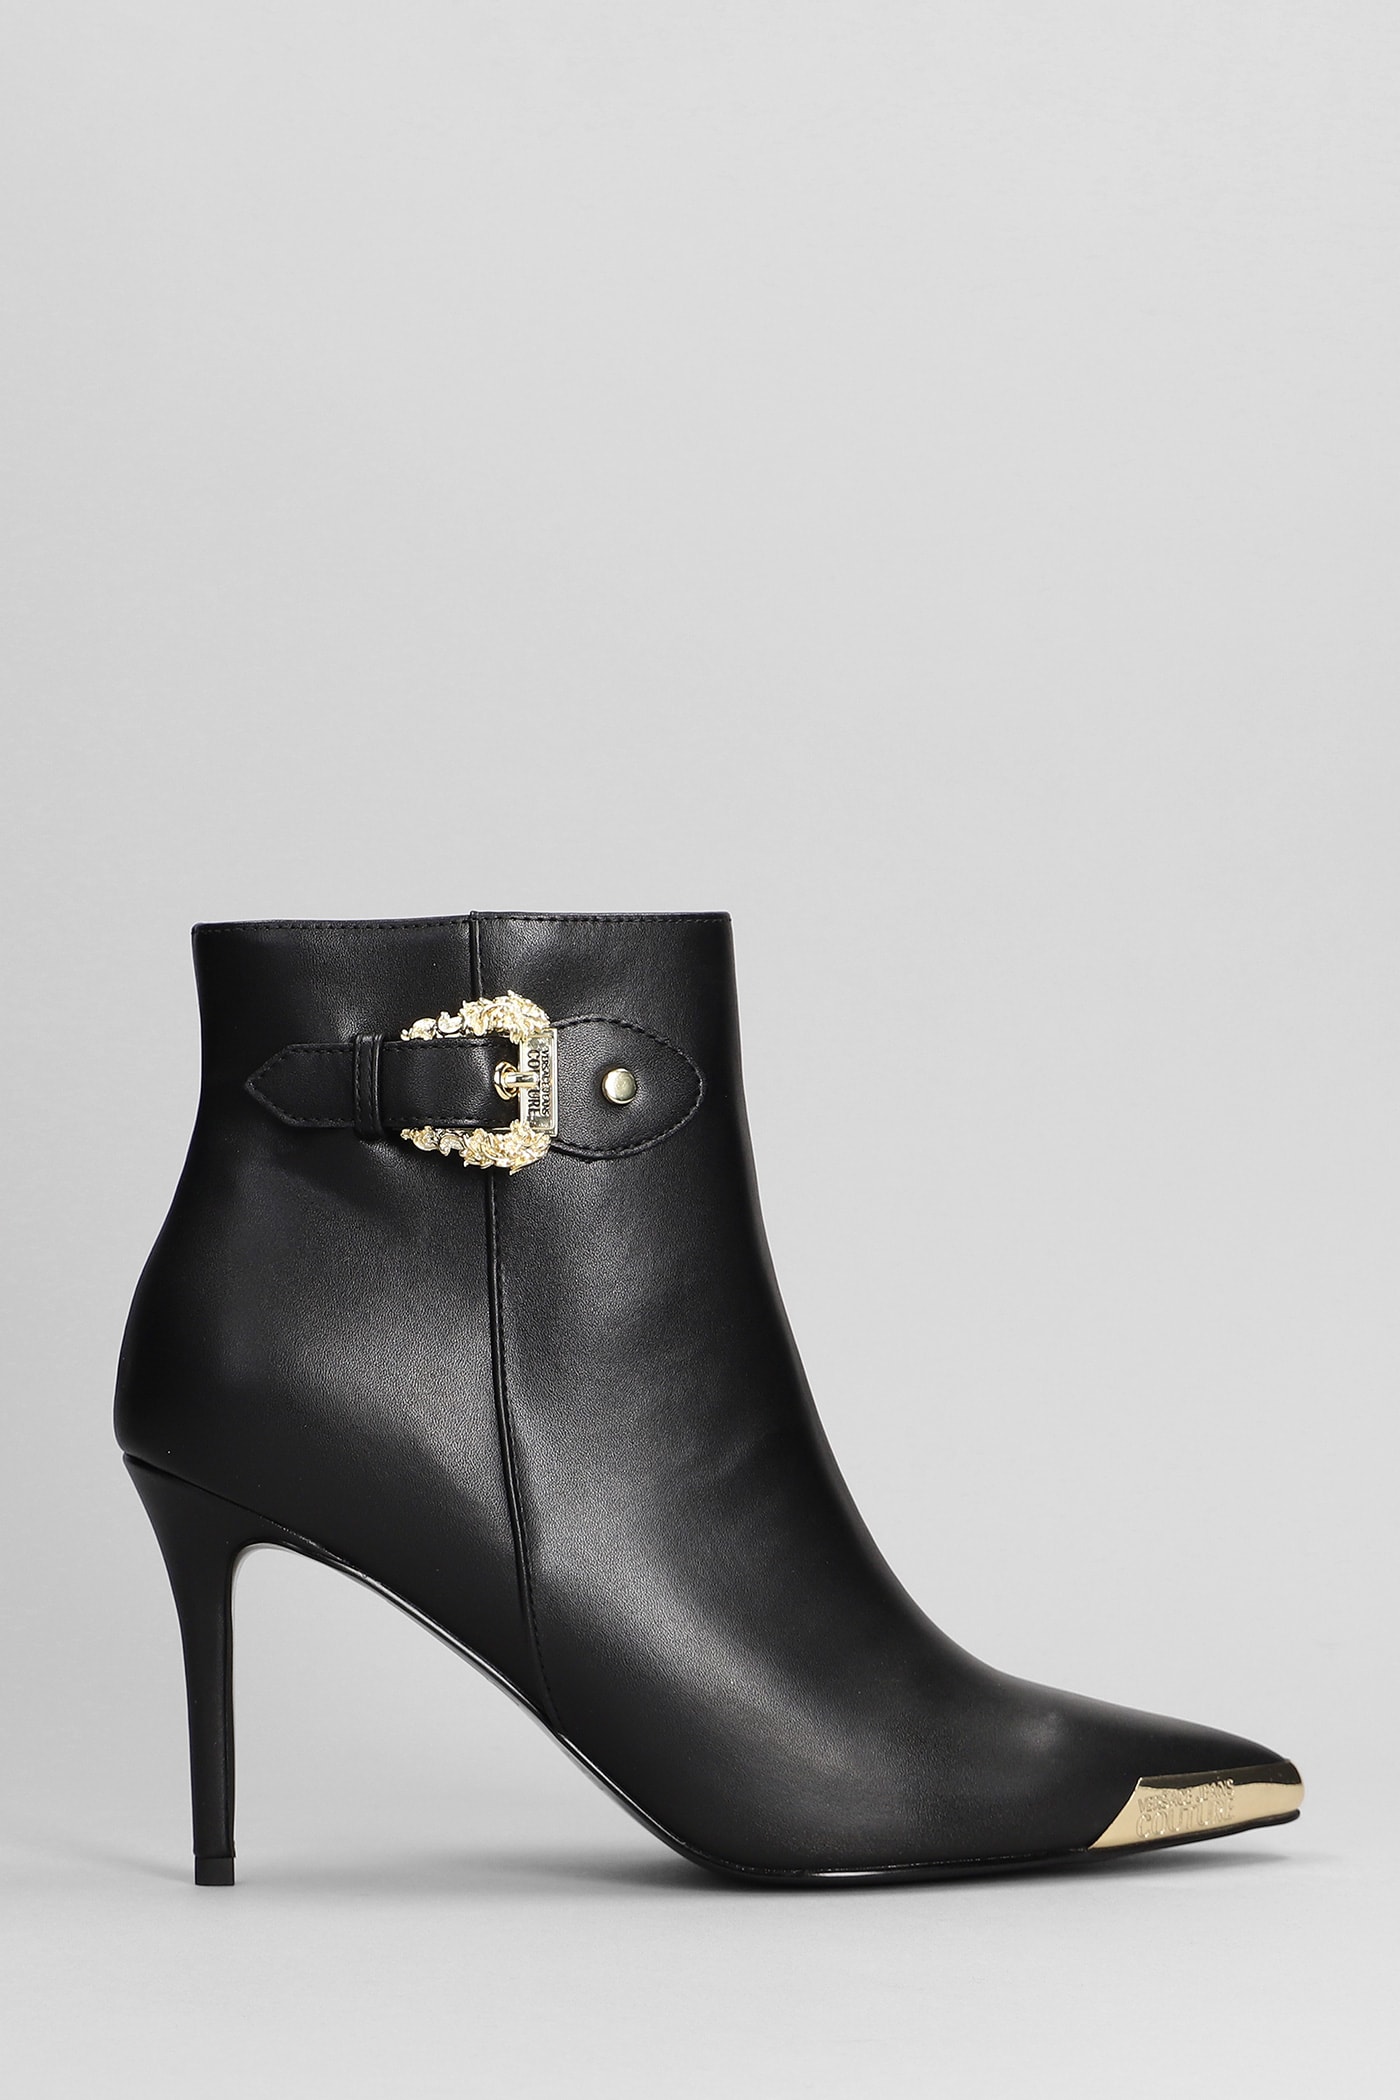 VERSACE JEANS COUTURE HIGH HEELS ANKLE BOOTS IN BLACK LEATHER